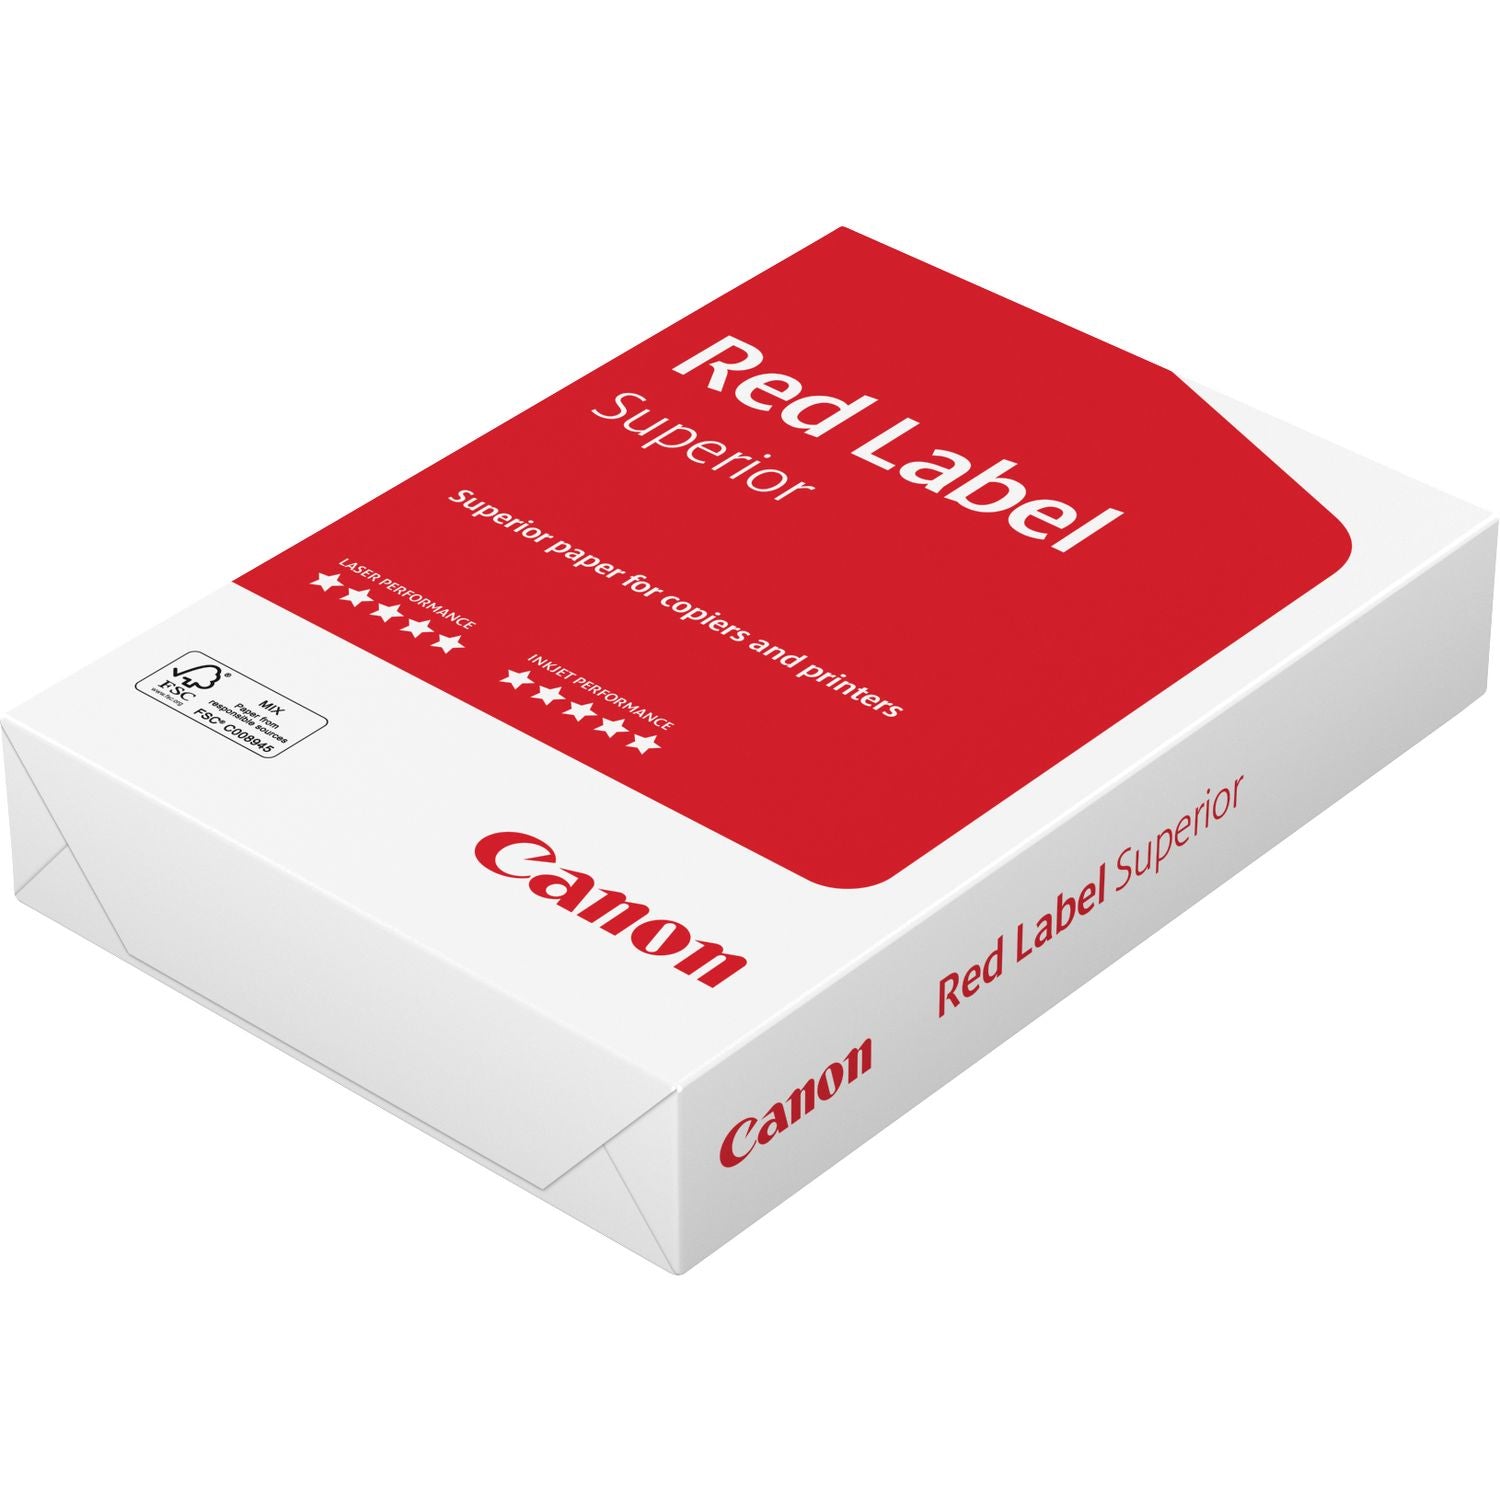 CANON Red Label Superior A4 90g 4 x 500